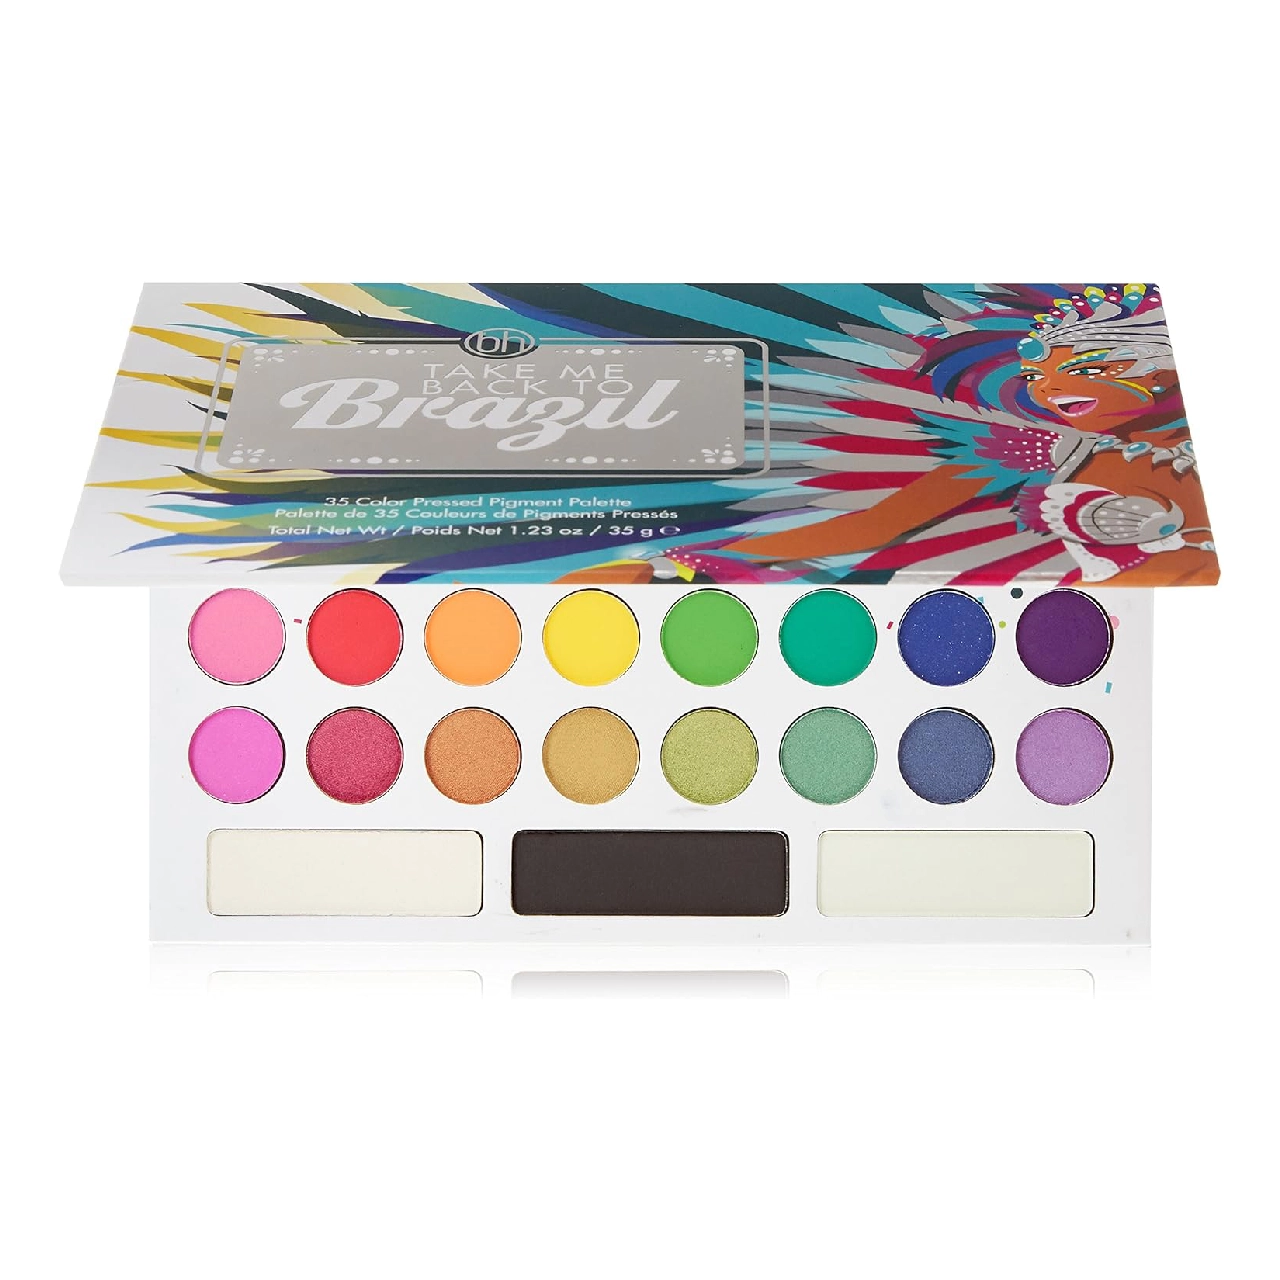 BH Cosmetics 35 Color Eyeshadow Palette displayed on a white background